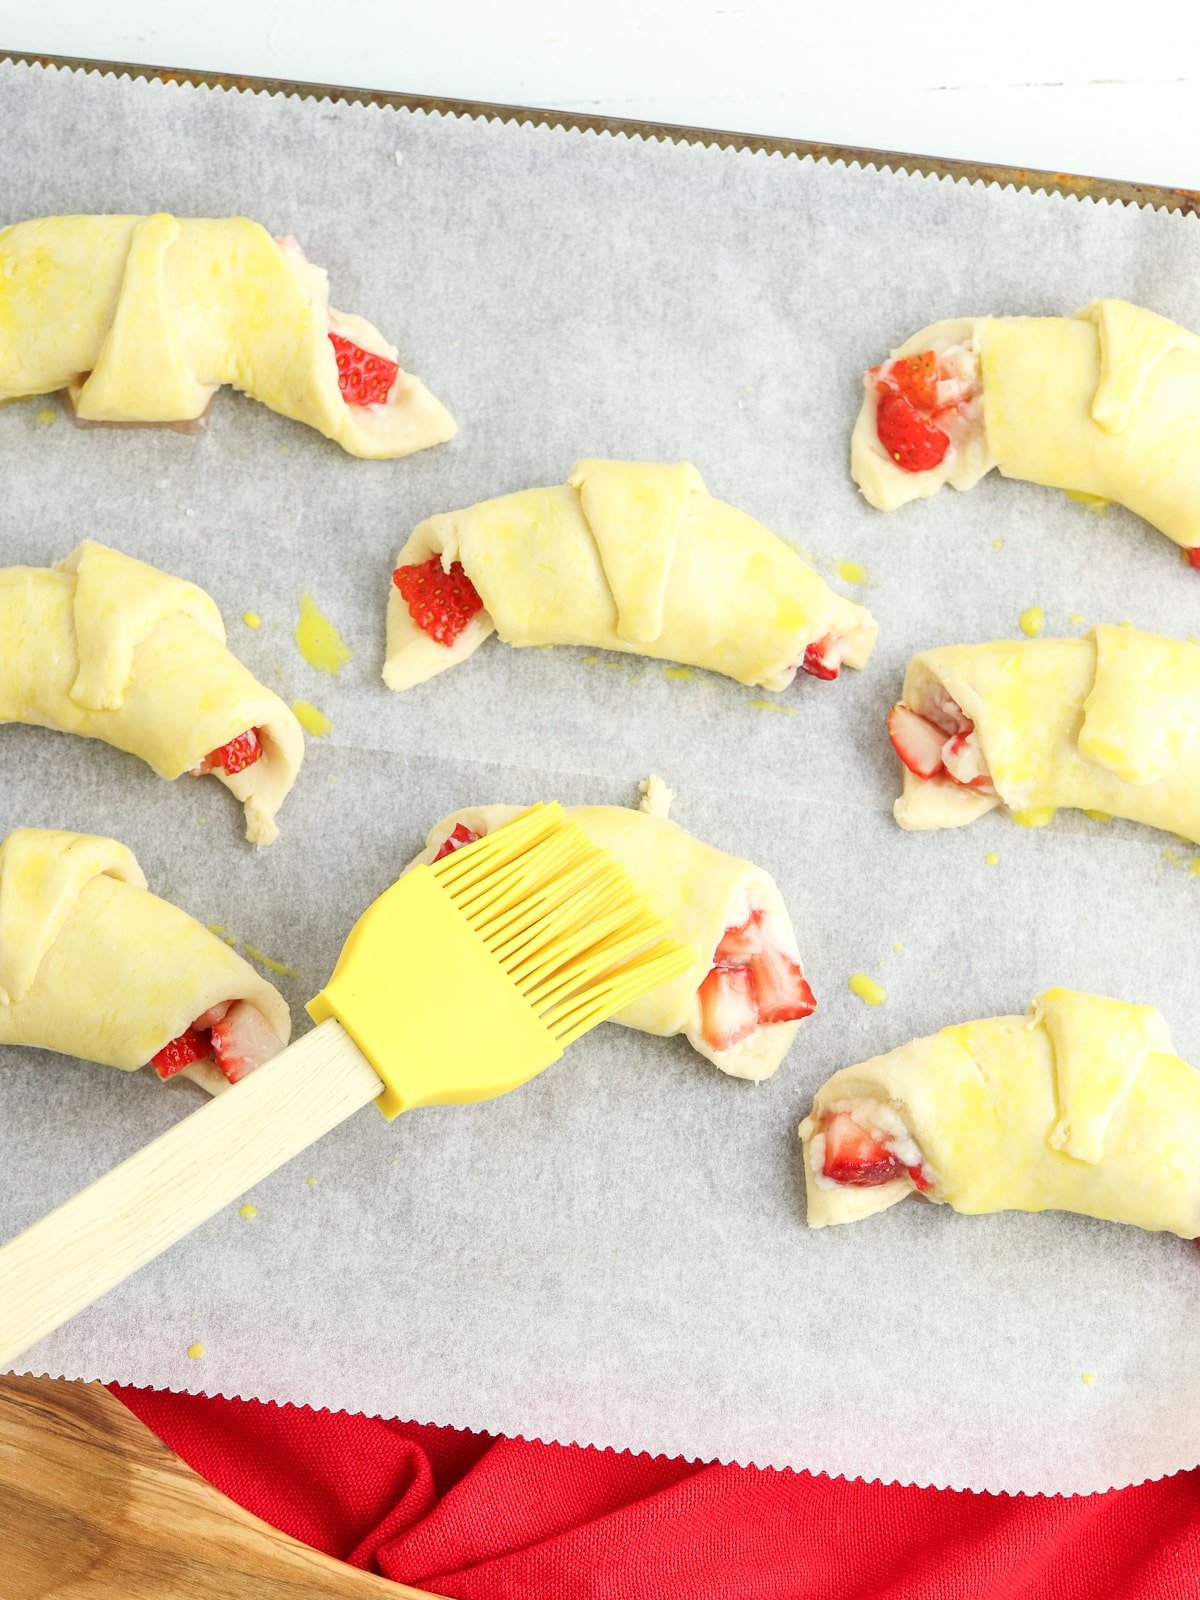 brush tops of crescent rolls with egg wash